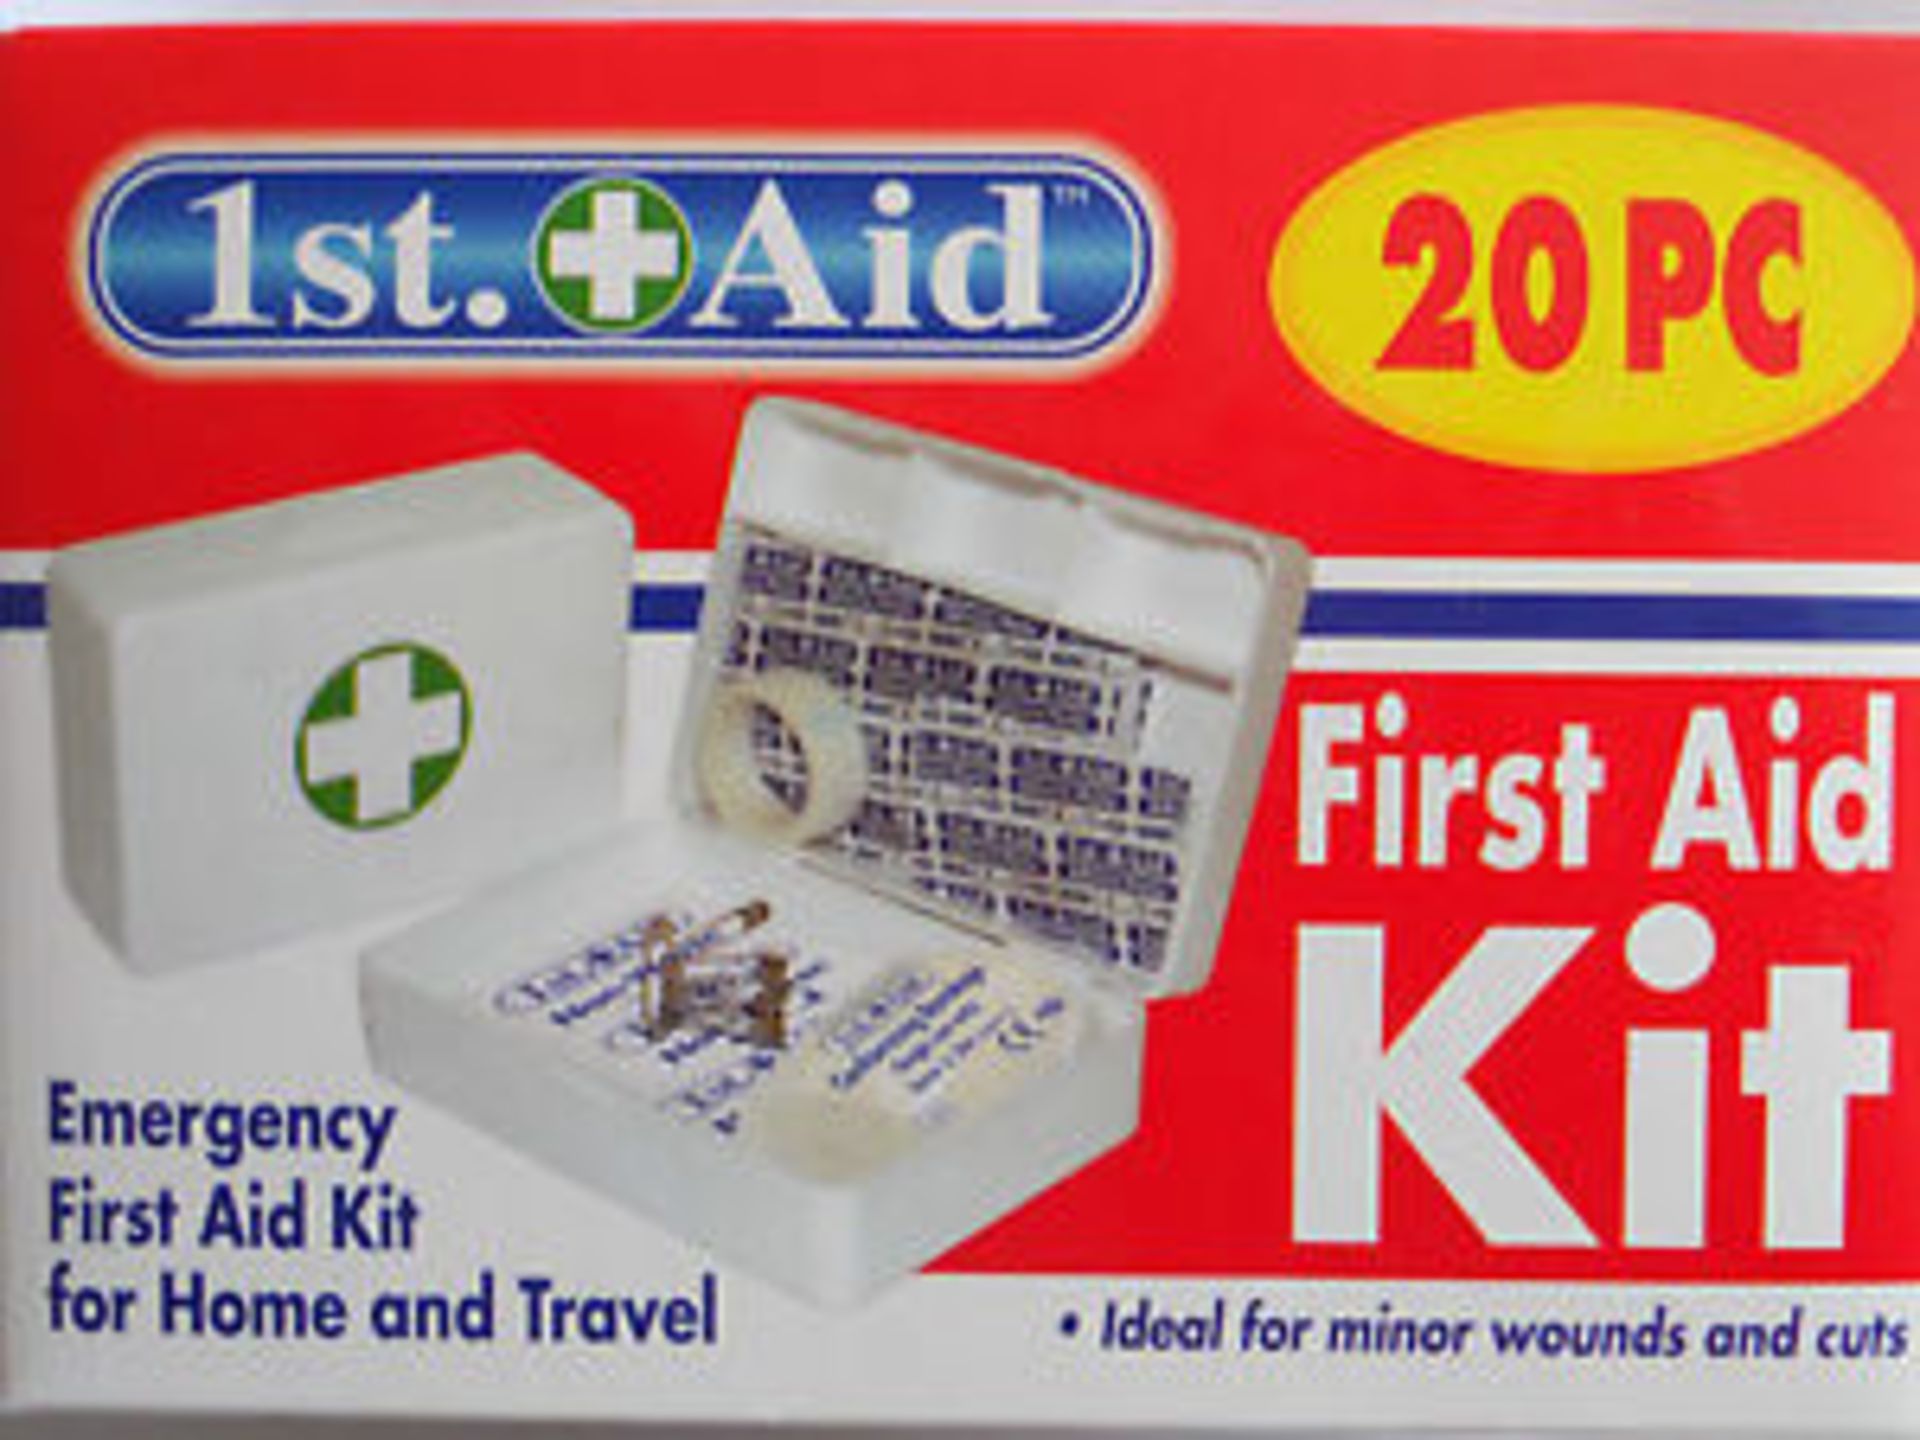 V *TRADE QTY* Brand New Six 20pc First Aid Kits In Plastic Case X 3 YOUR BID PRICE TO BE